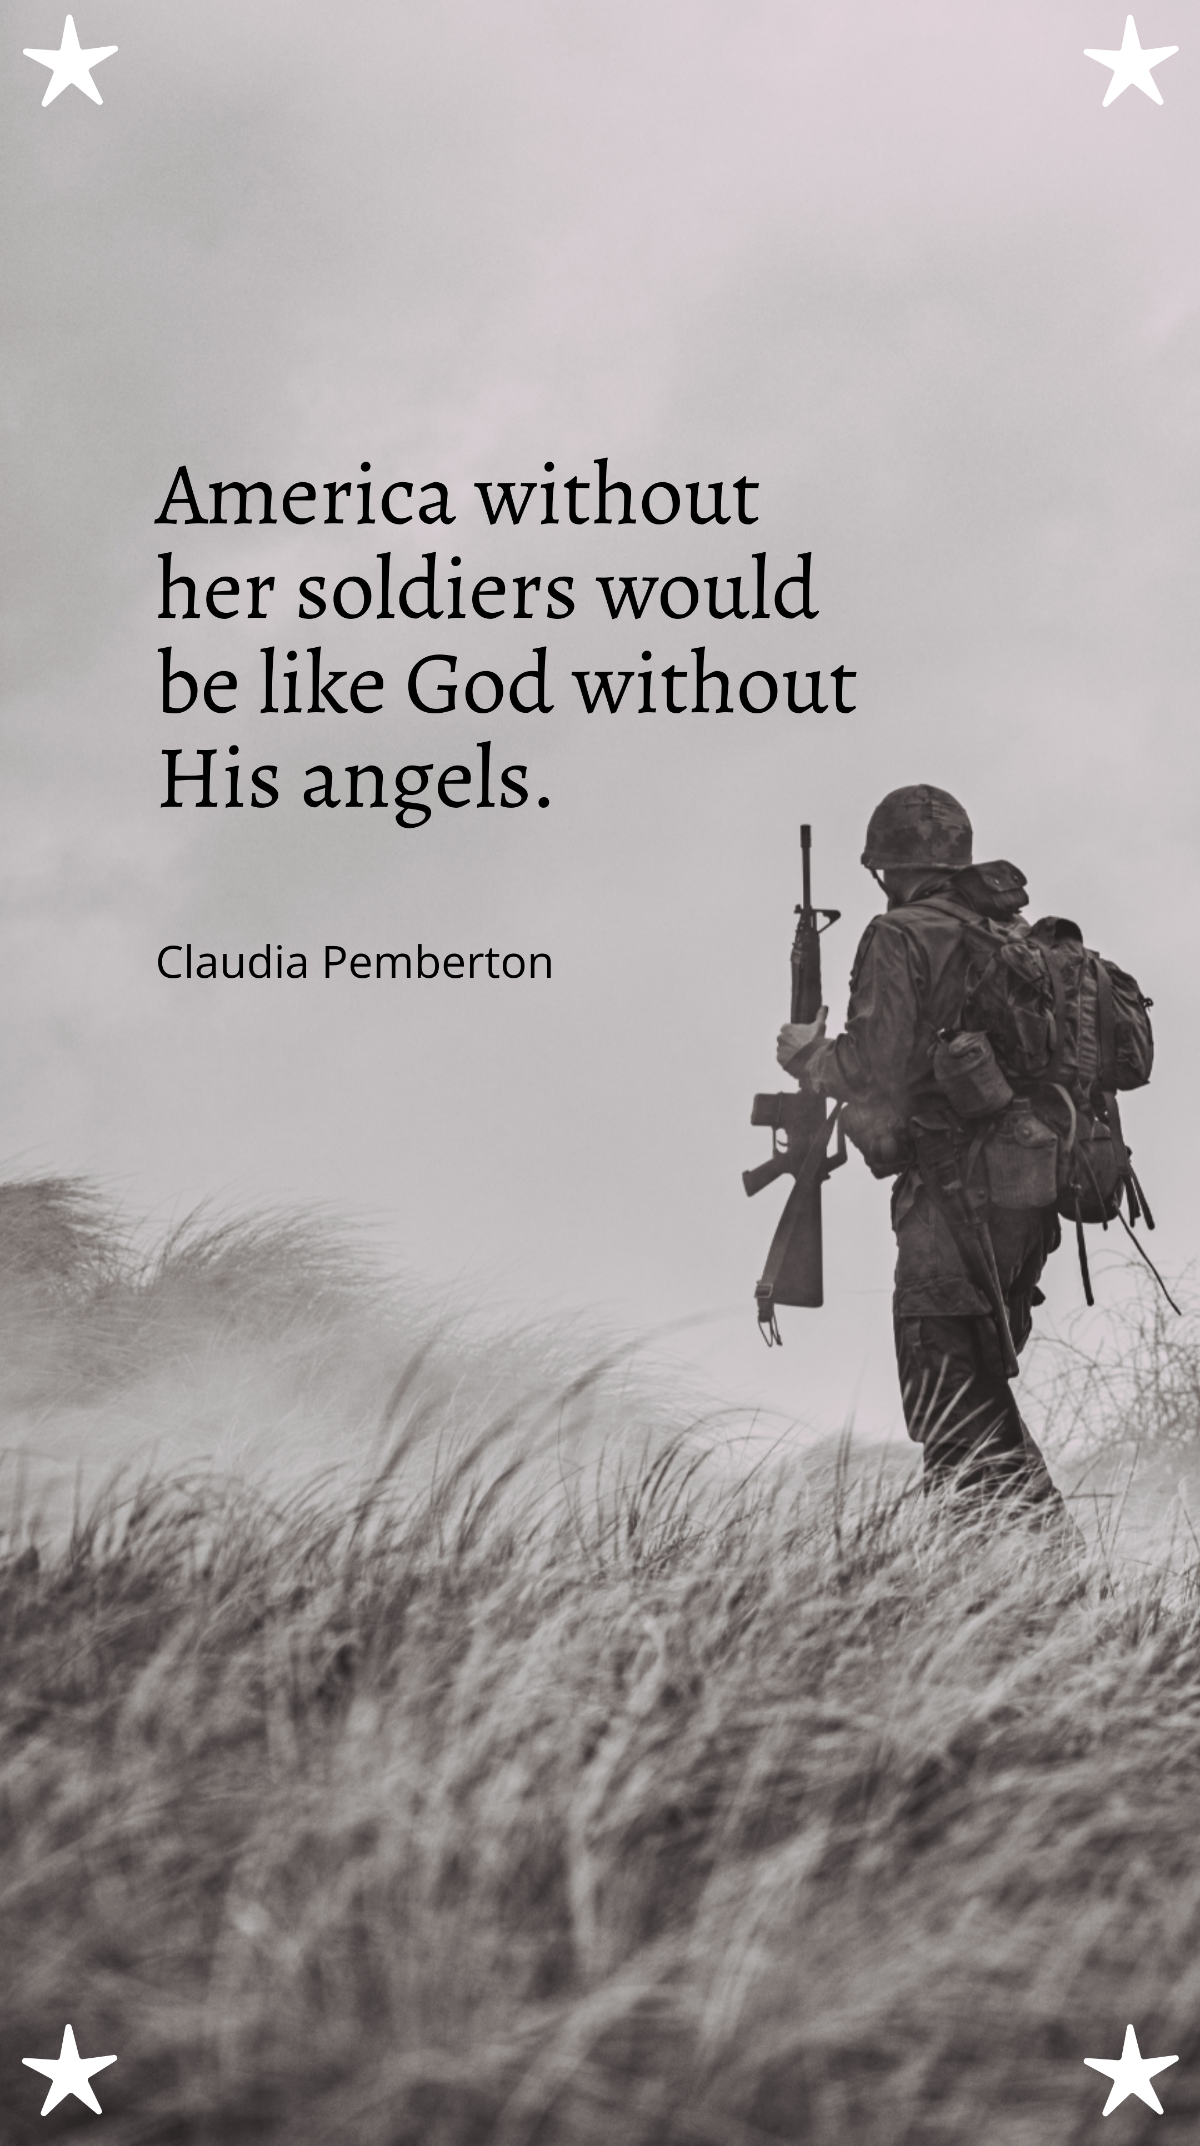 Claudia Pemberton - “America without her soldiers would be like God without His angels.” Template